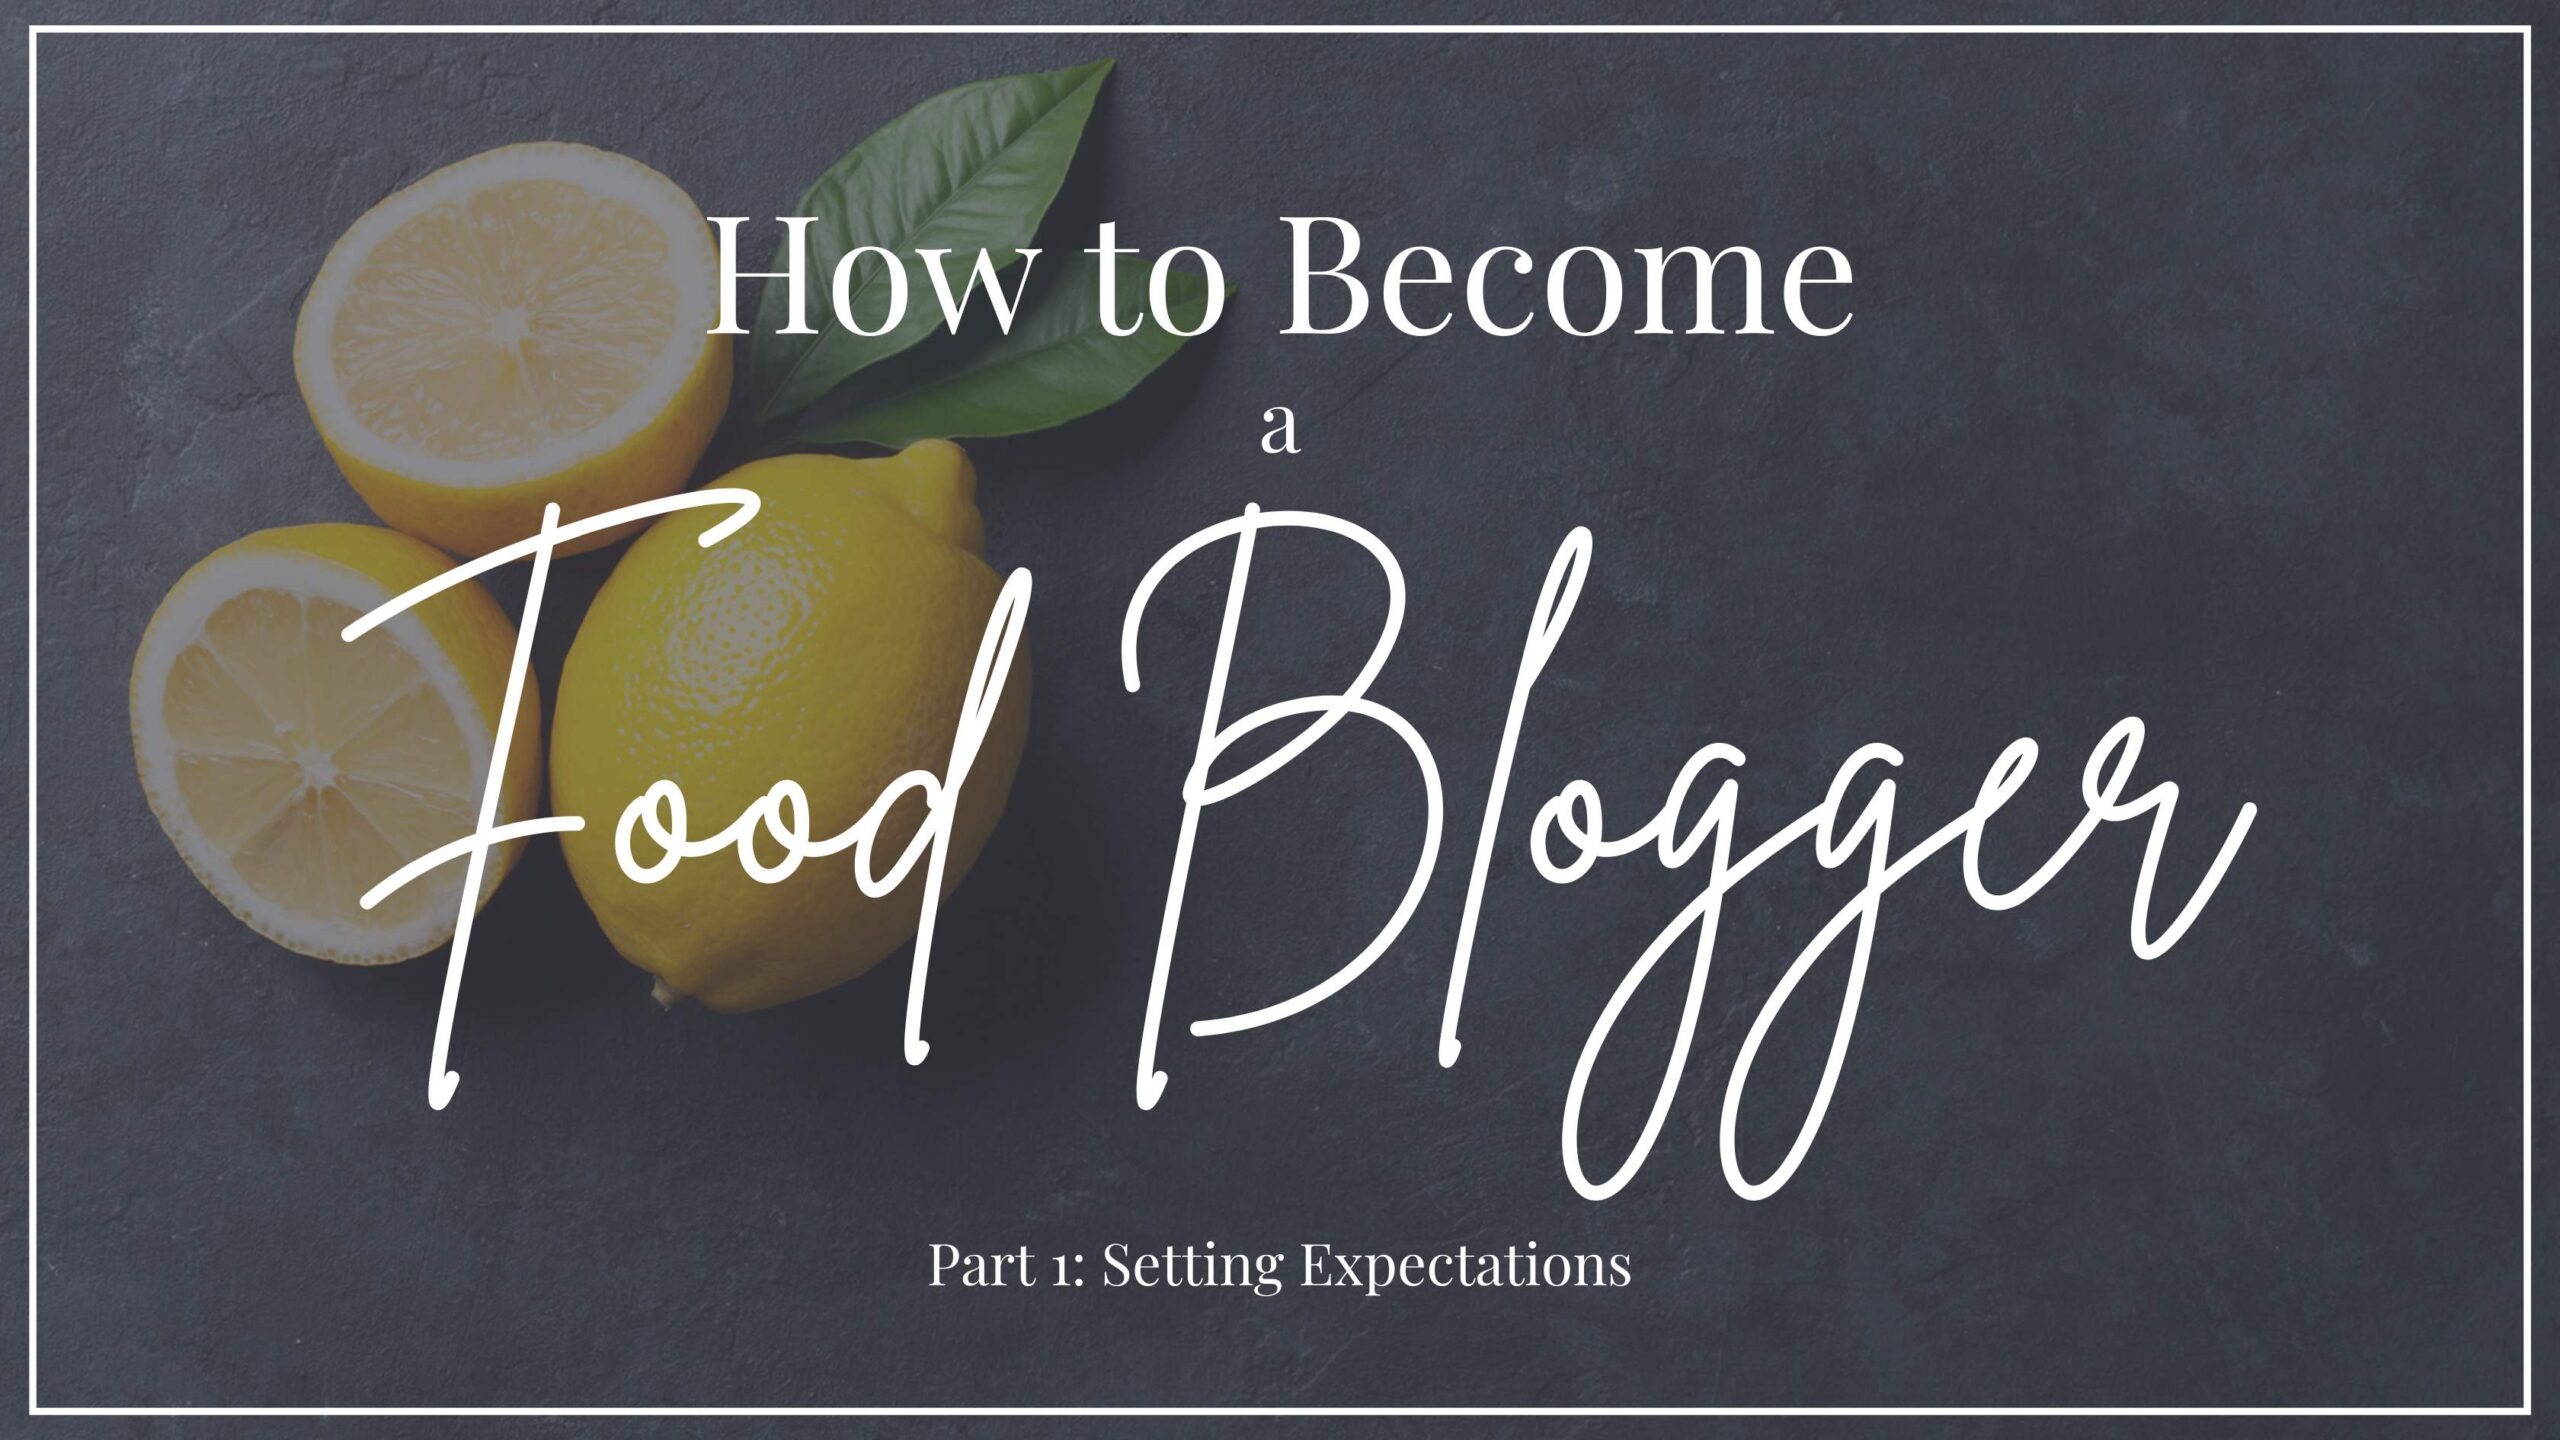 How to Become a Food Blogger (Part 1)